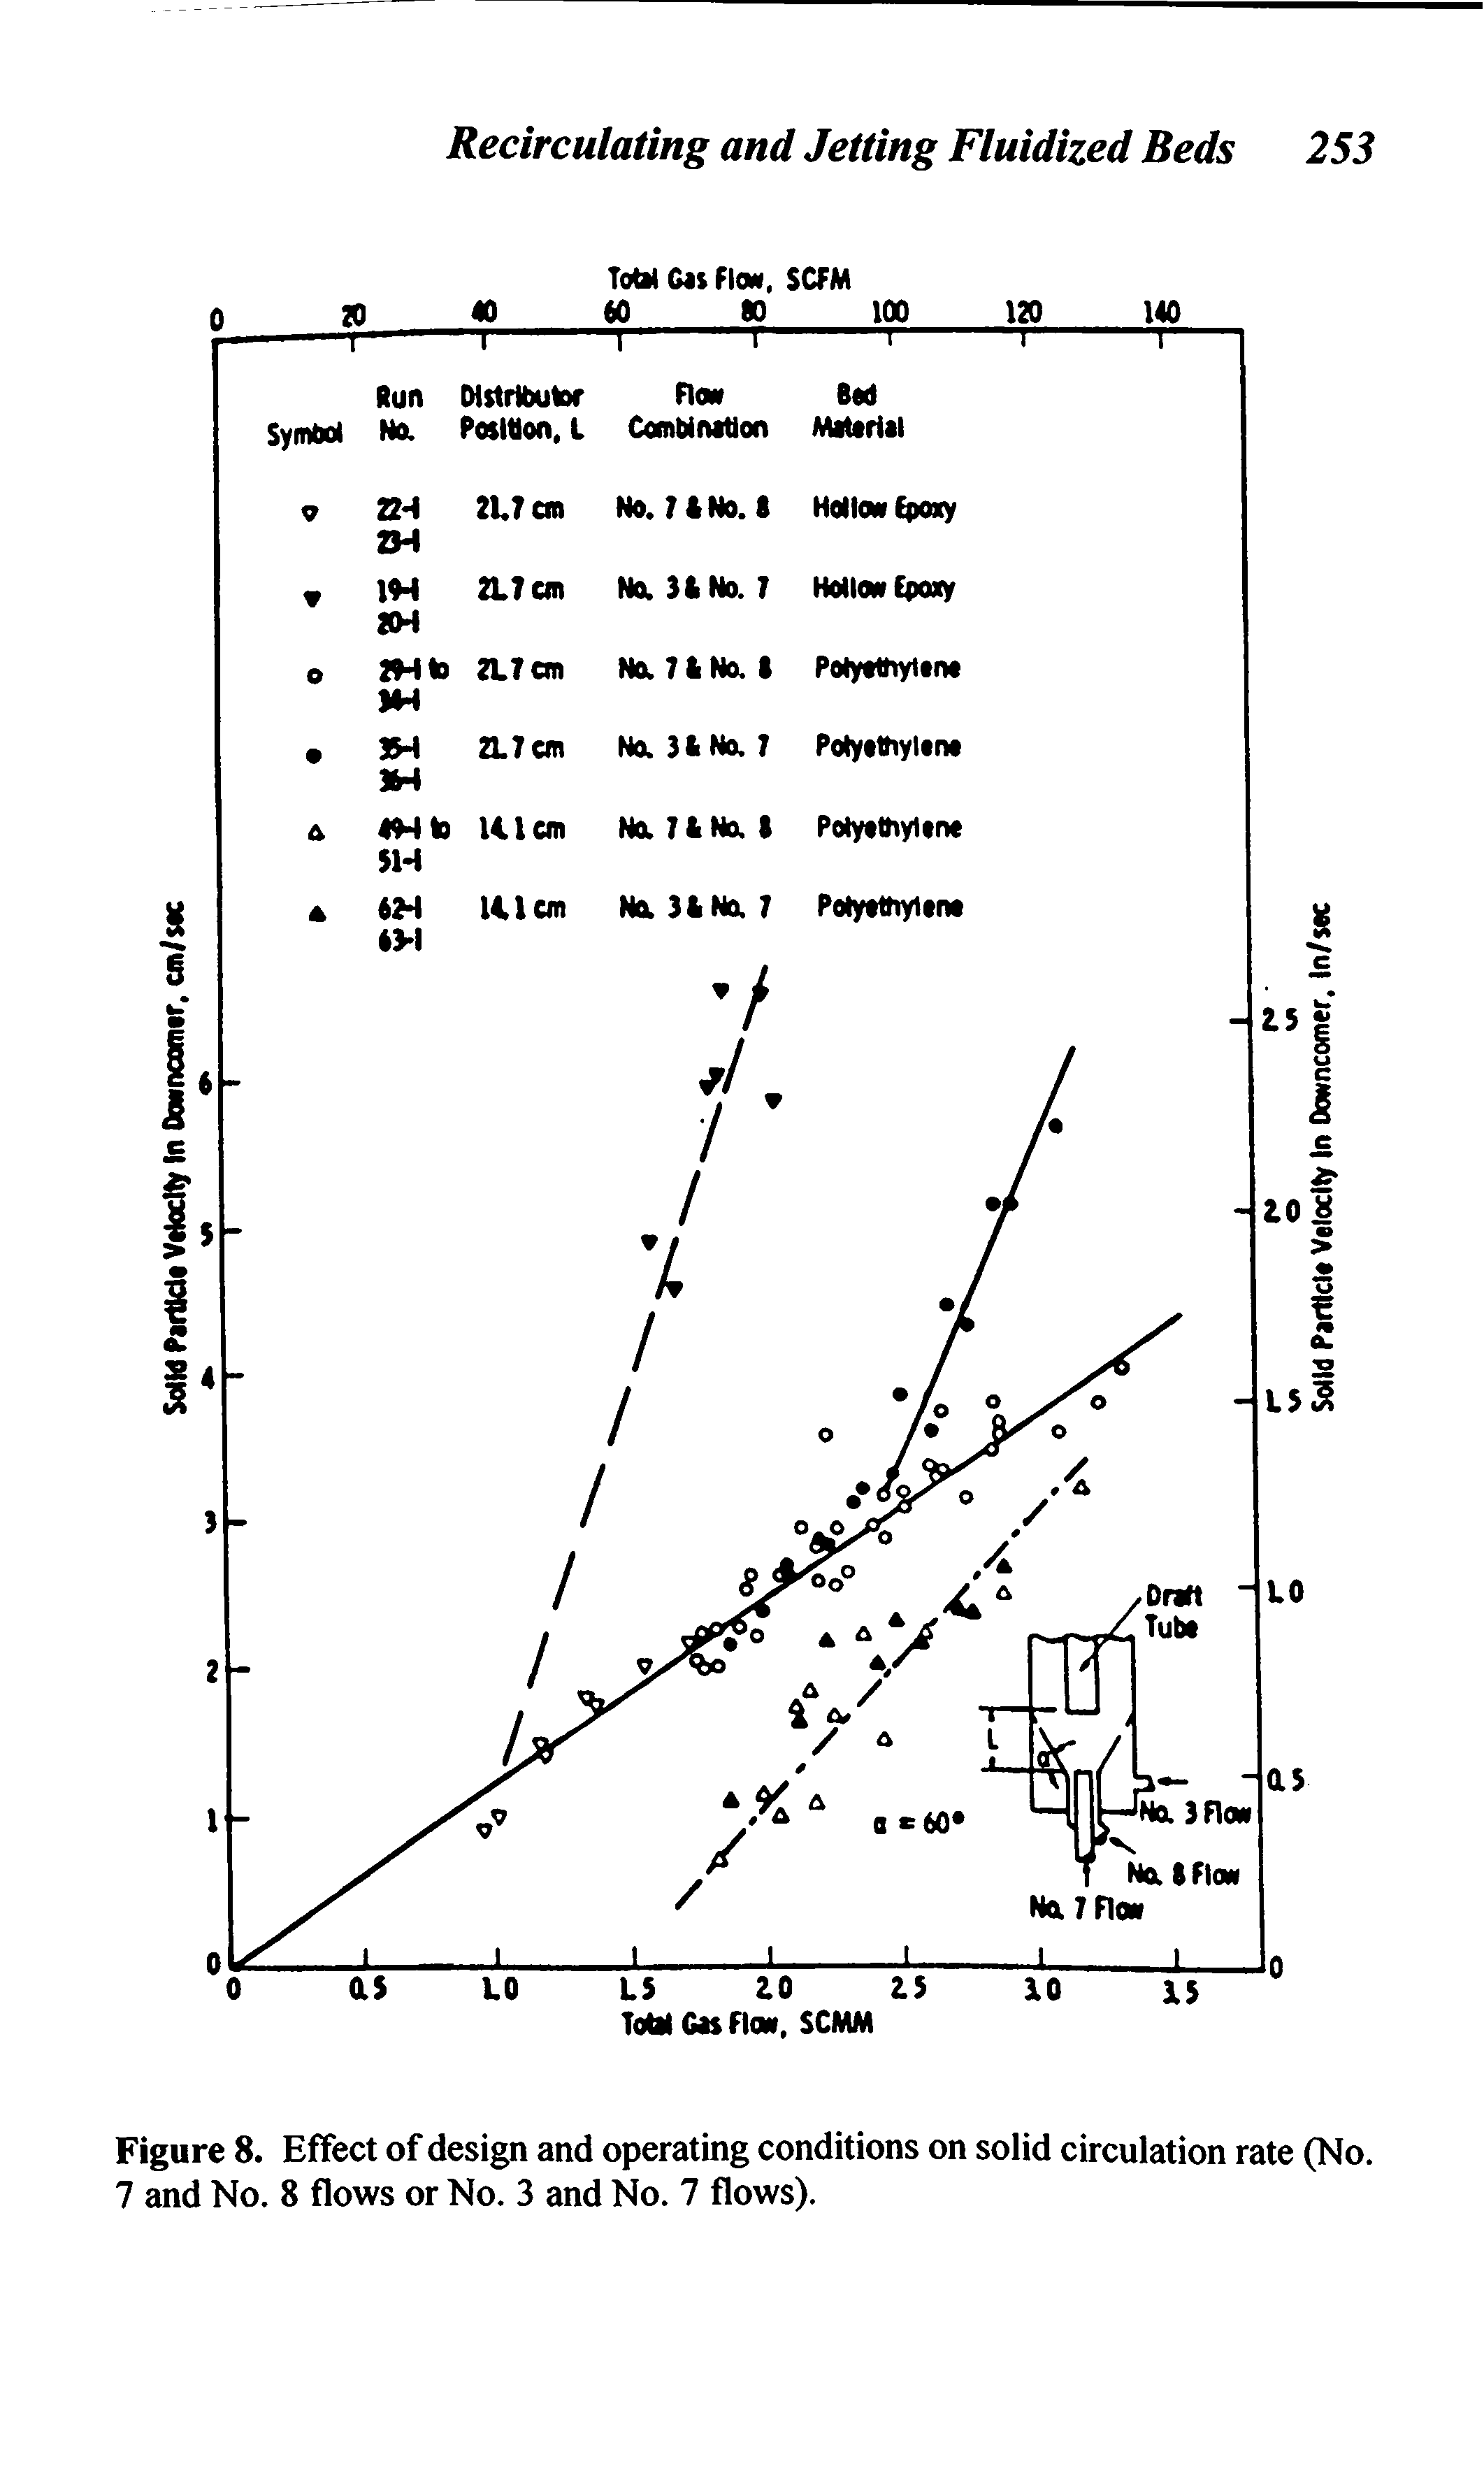 Figure 8. Effect of design and operating conditions on solid circulation rate (No. 7 and No. 8 flows or No. 3 and No. 7 flows).